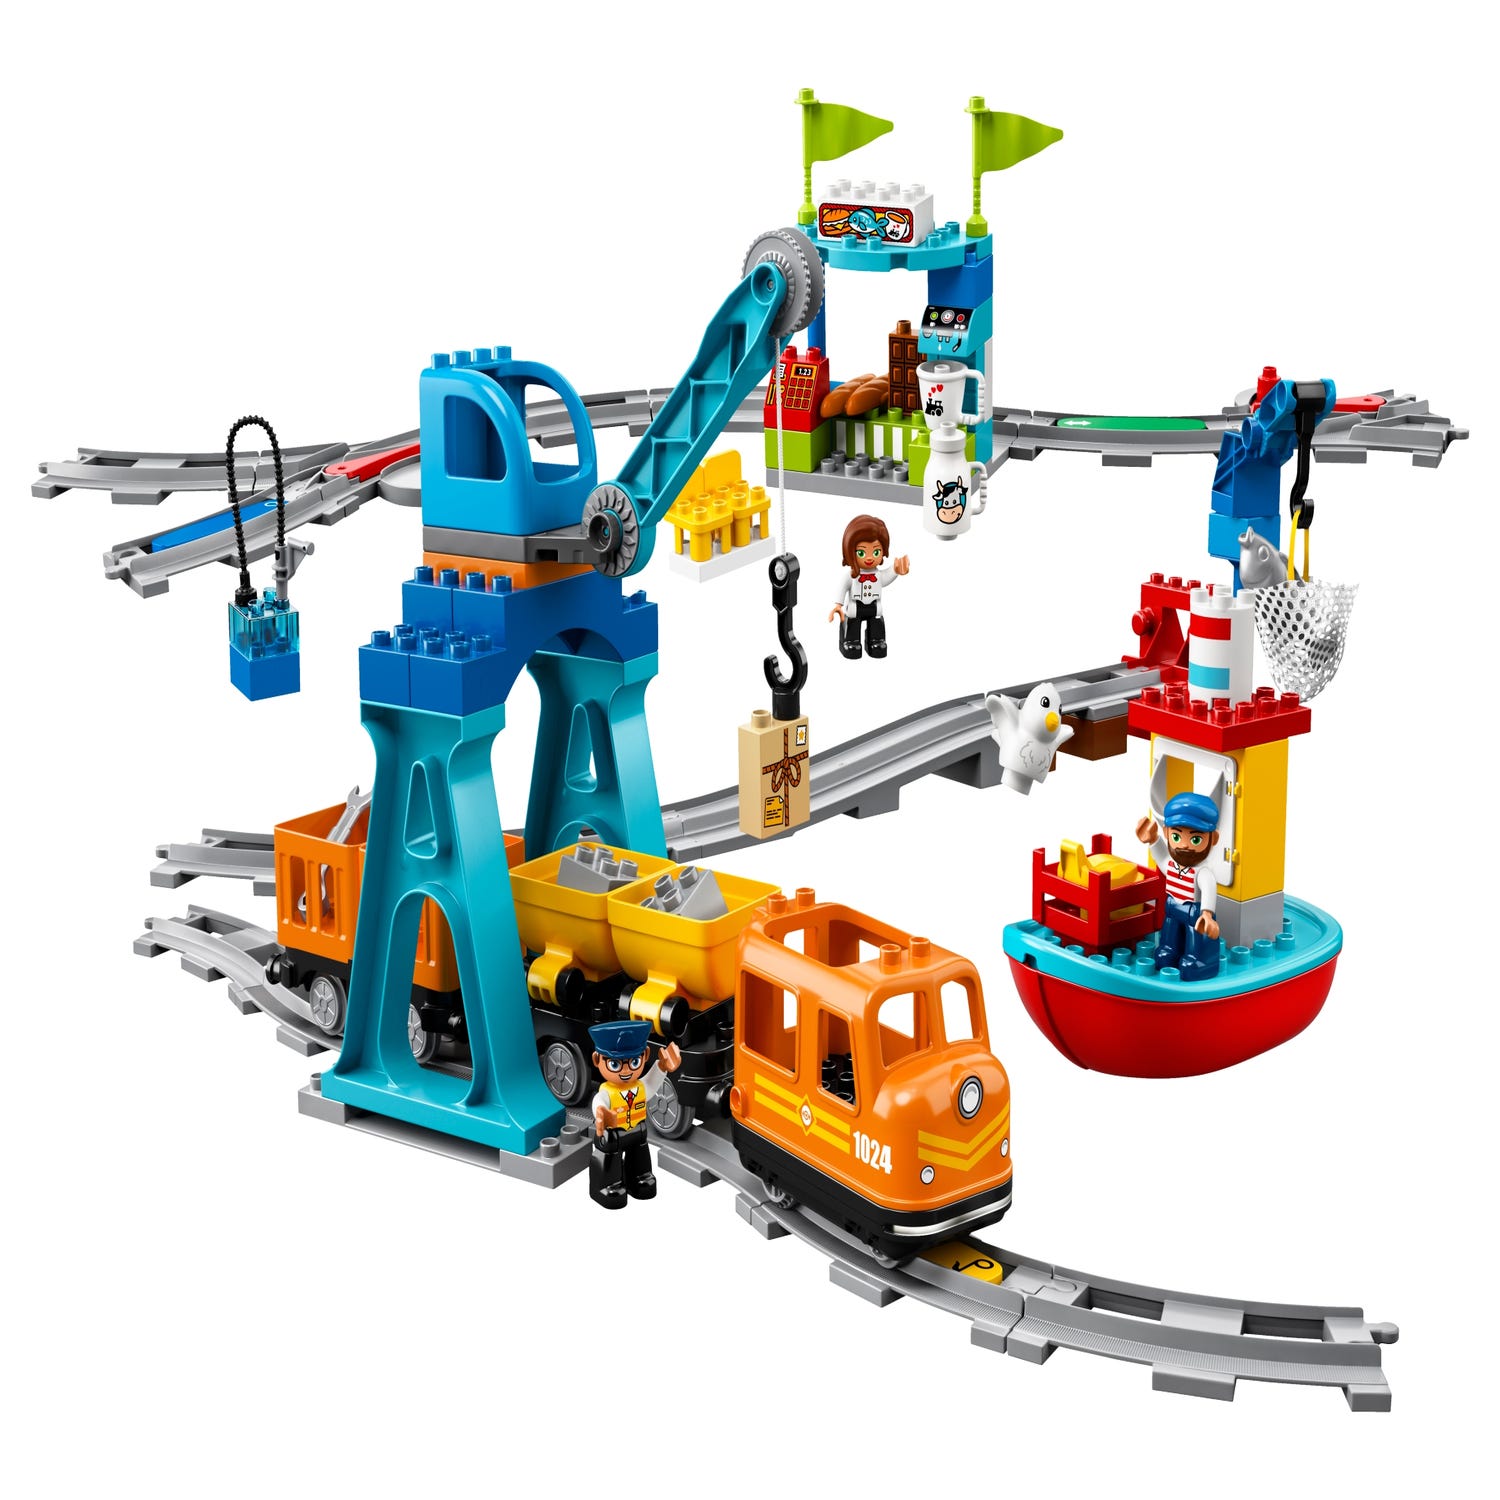 Website with layout plans for LEGO Duplo trains?